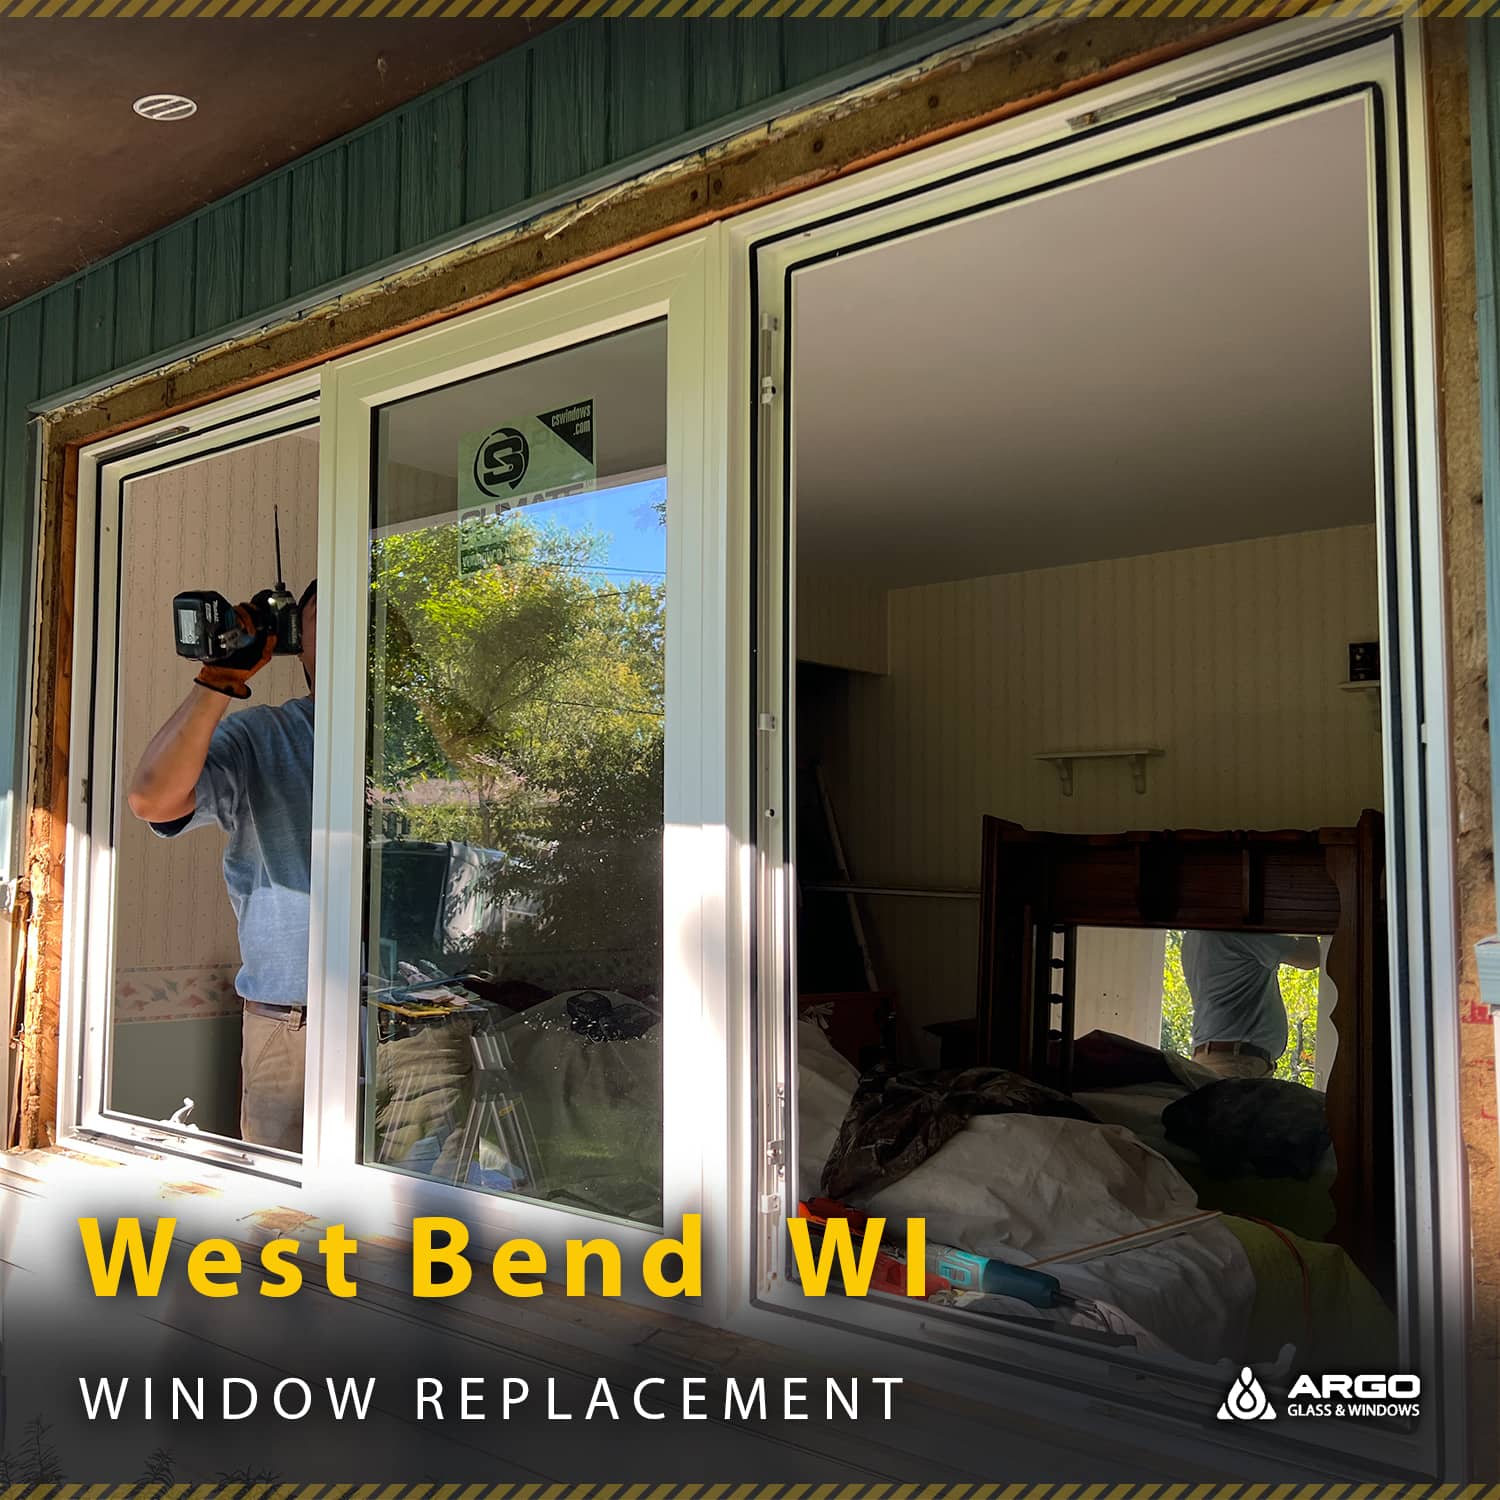 Professional Window Replacement company